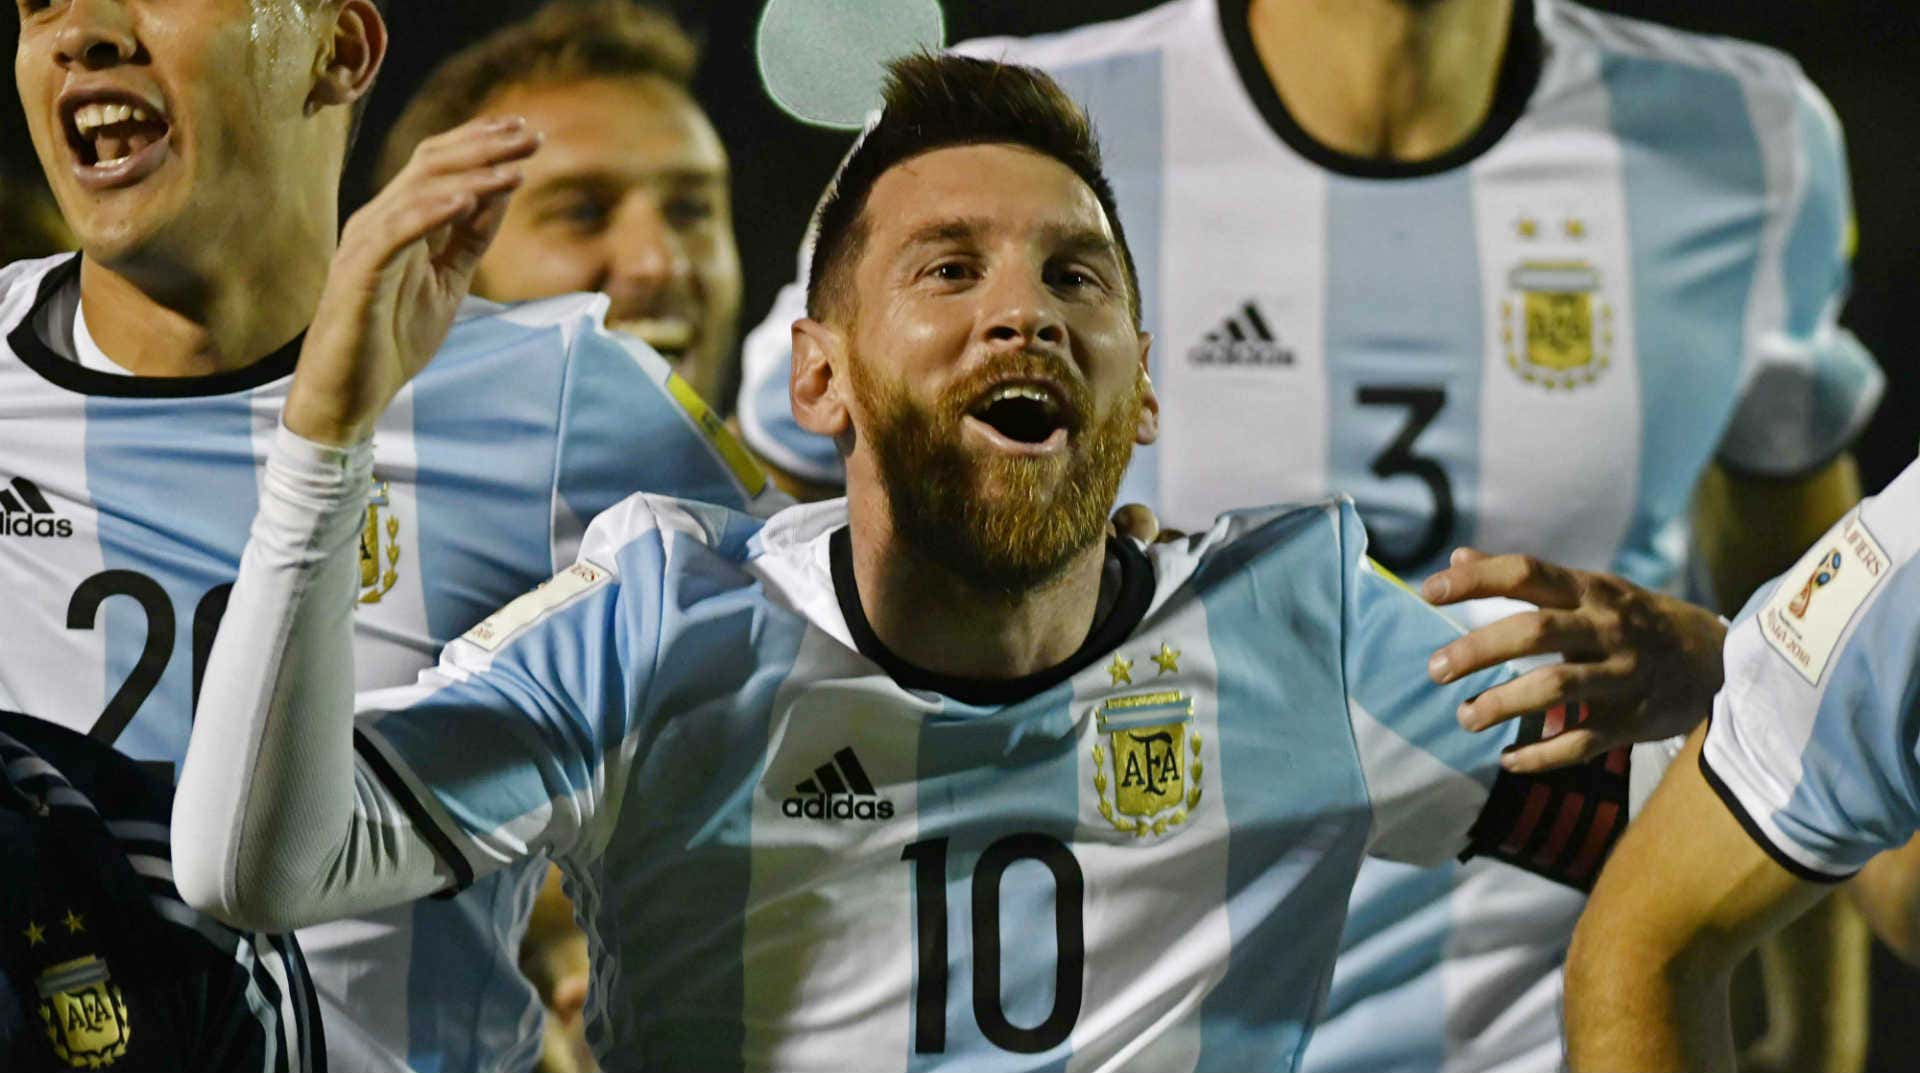 GettyImages-859950006 Messi Argentina